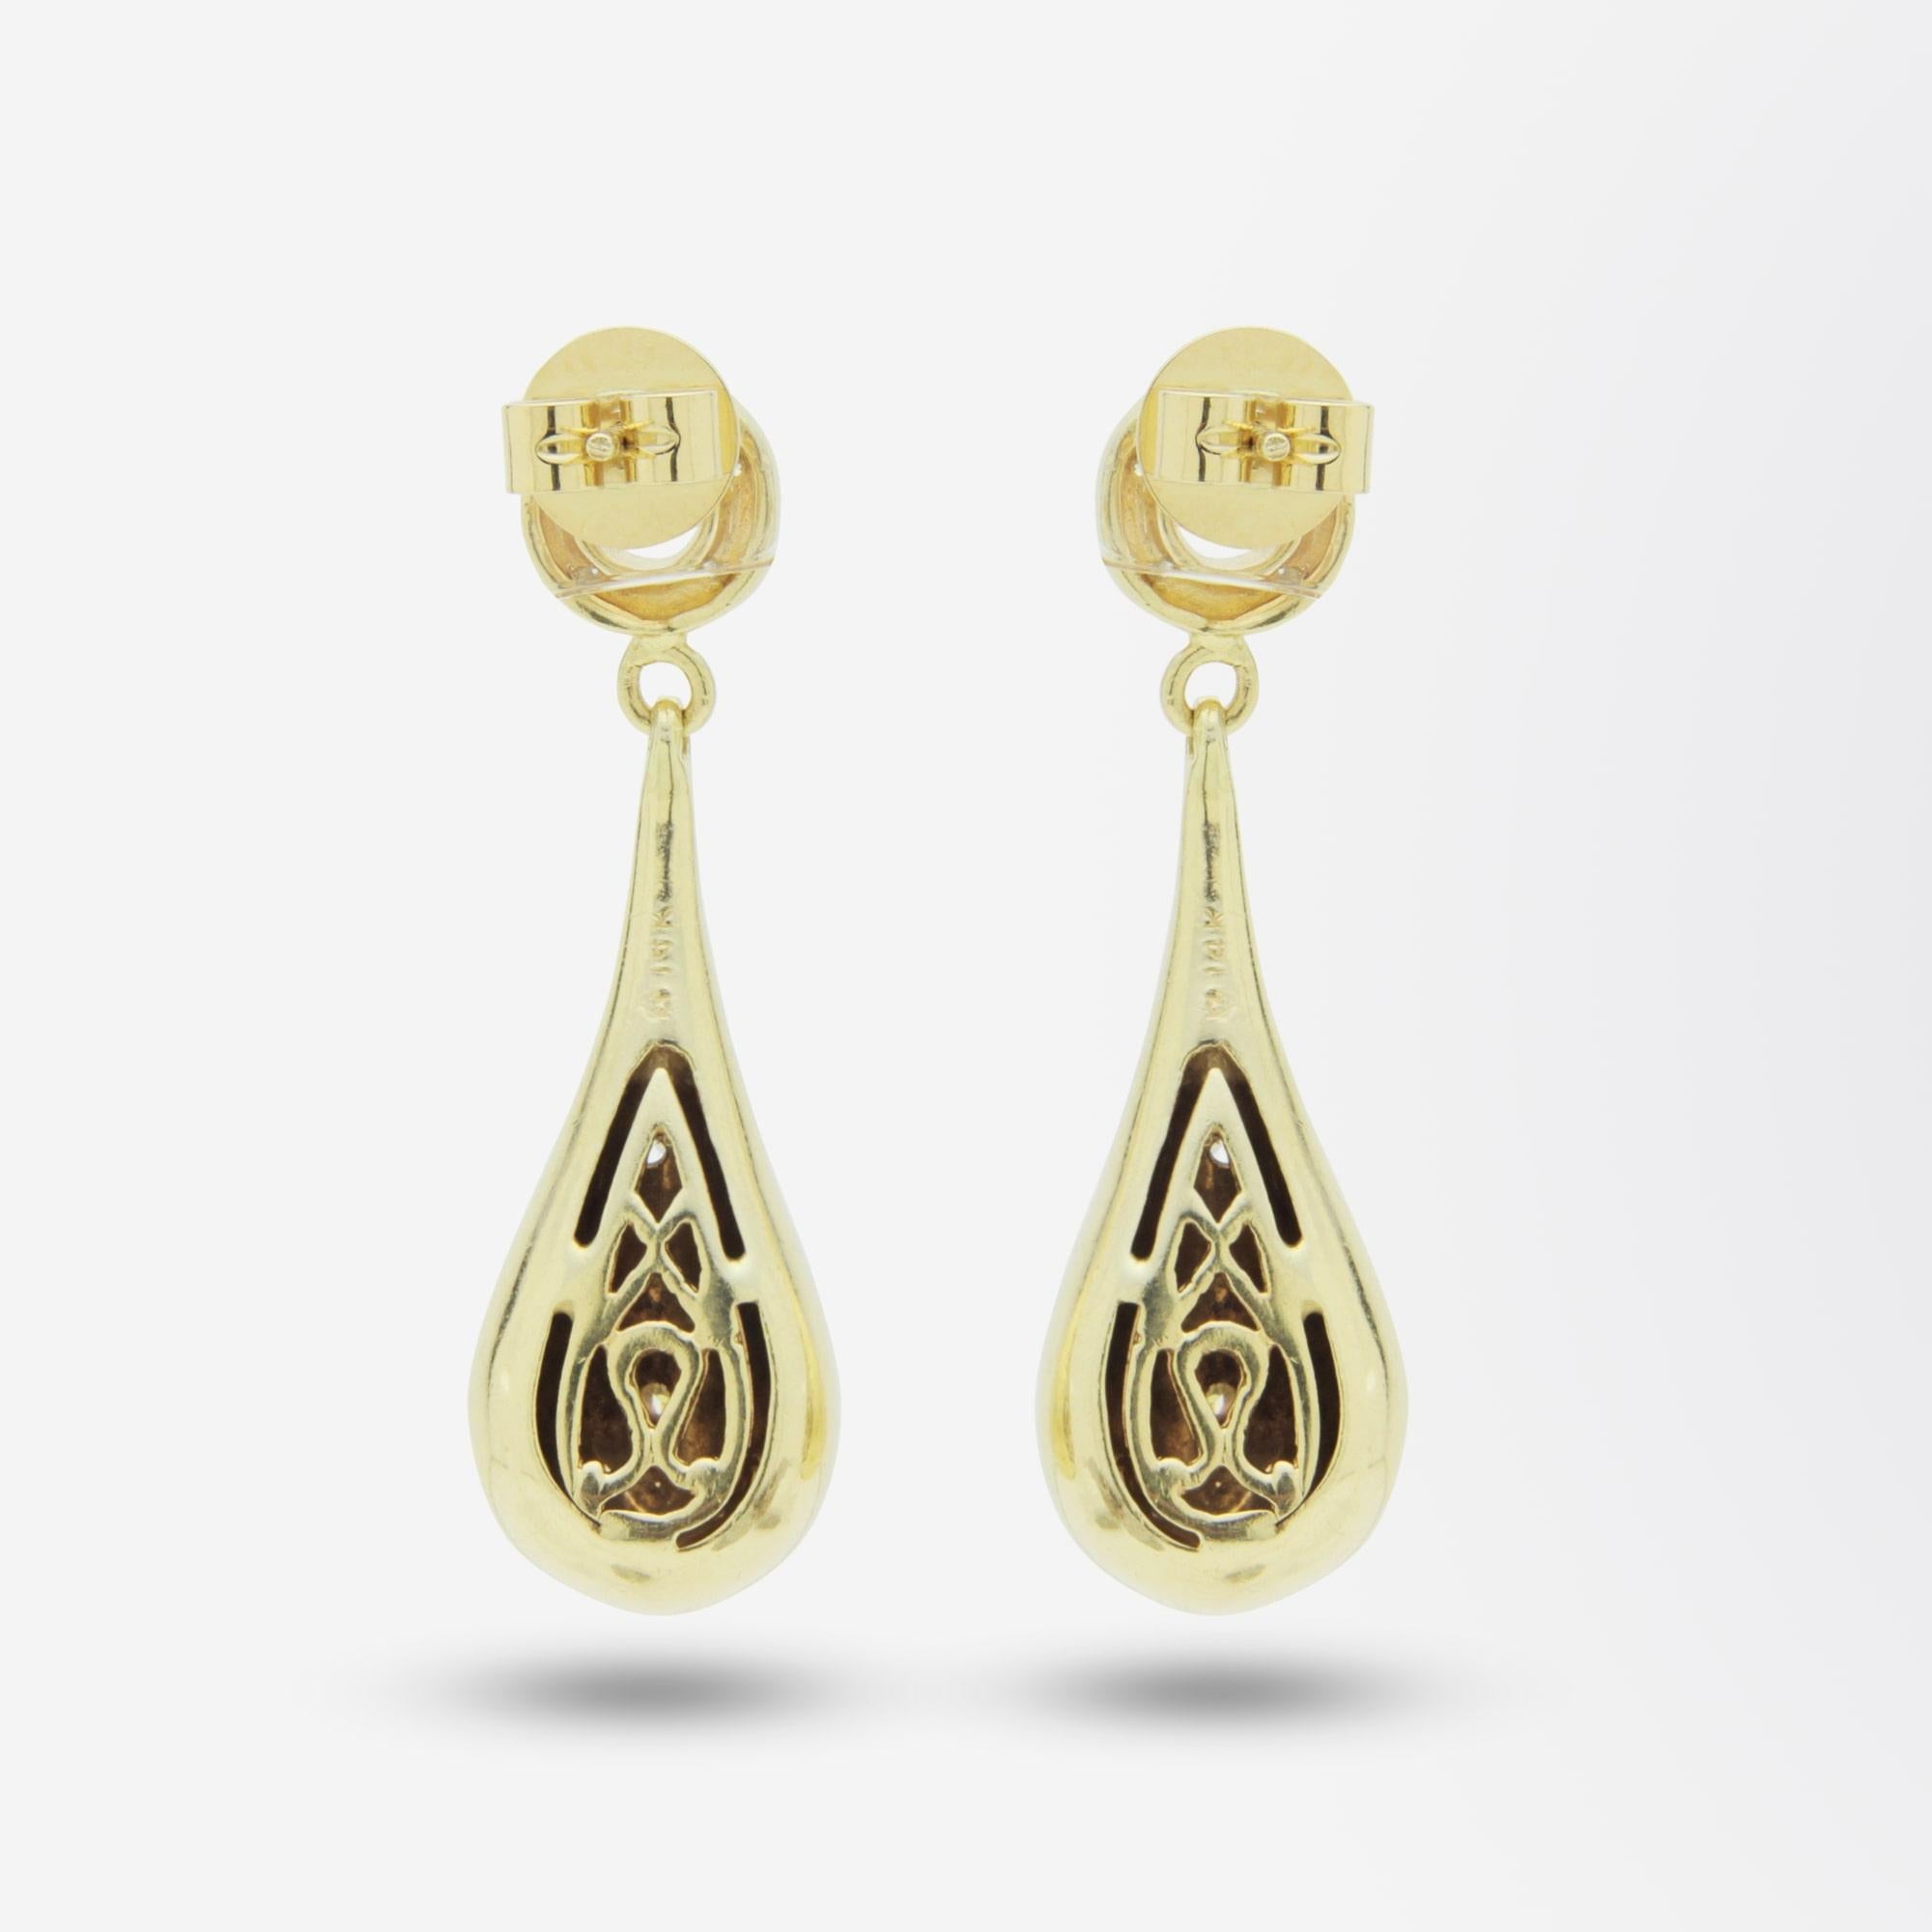 A fine quality pair of gold ear studs which have a hanging gold 'teardrop' that have been pressure set with brilliant cut diamonds. The 14 karat gold body of the earrings have been set with a combined 0.70 carat of brilliant cut, G/H colour and